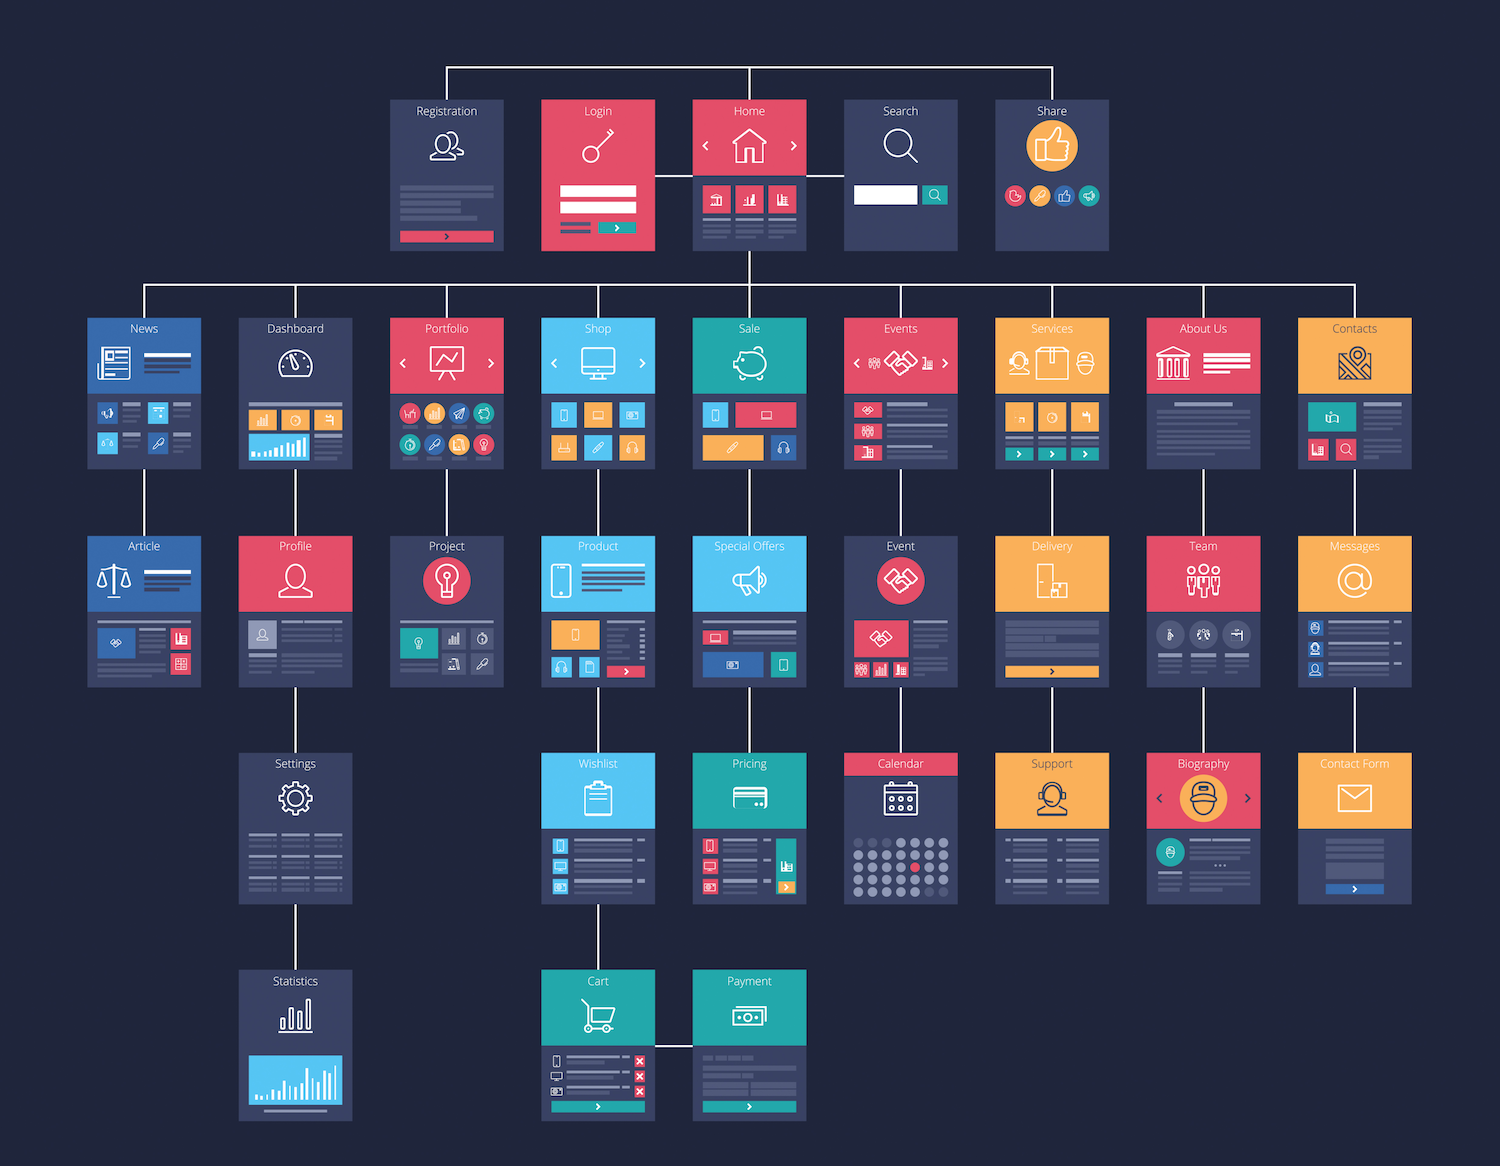 A site map describes the key components and interactions in a user flow.